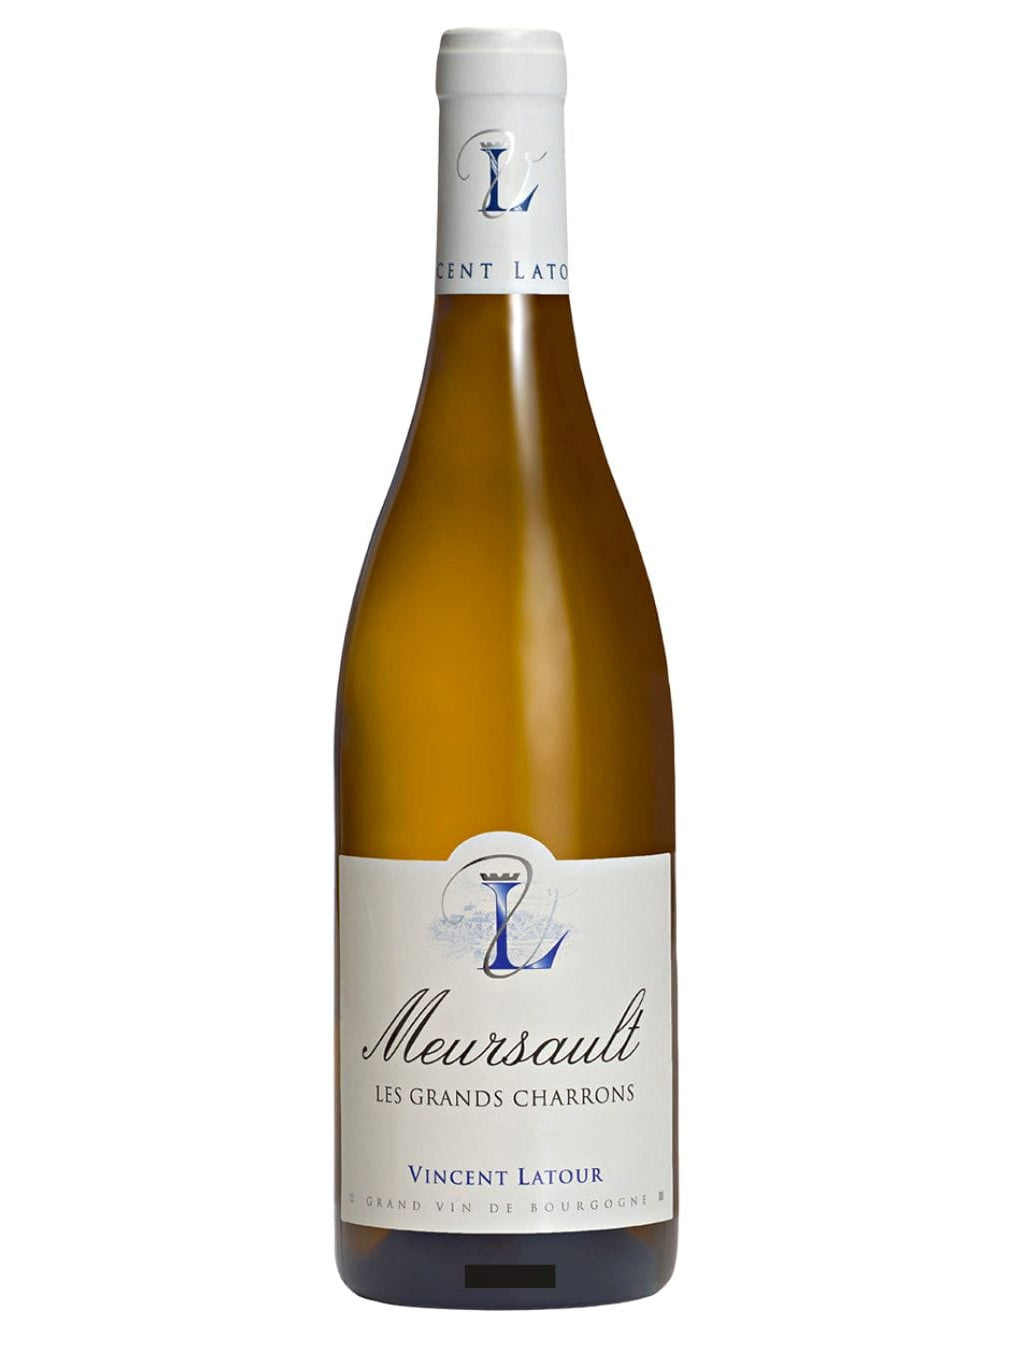 Shop Domaine Vincent Latour Domaine Vincent Latour Meursault Les Grands Charrons 2018 online at PENTICTON artisanal French wine store in Hong Kong. Discover other French wines, promotions, workshops and featured offers at pentictonpacific.com 